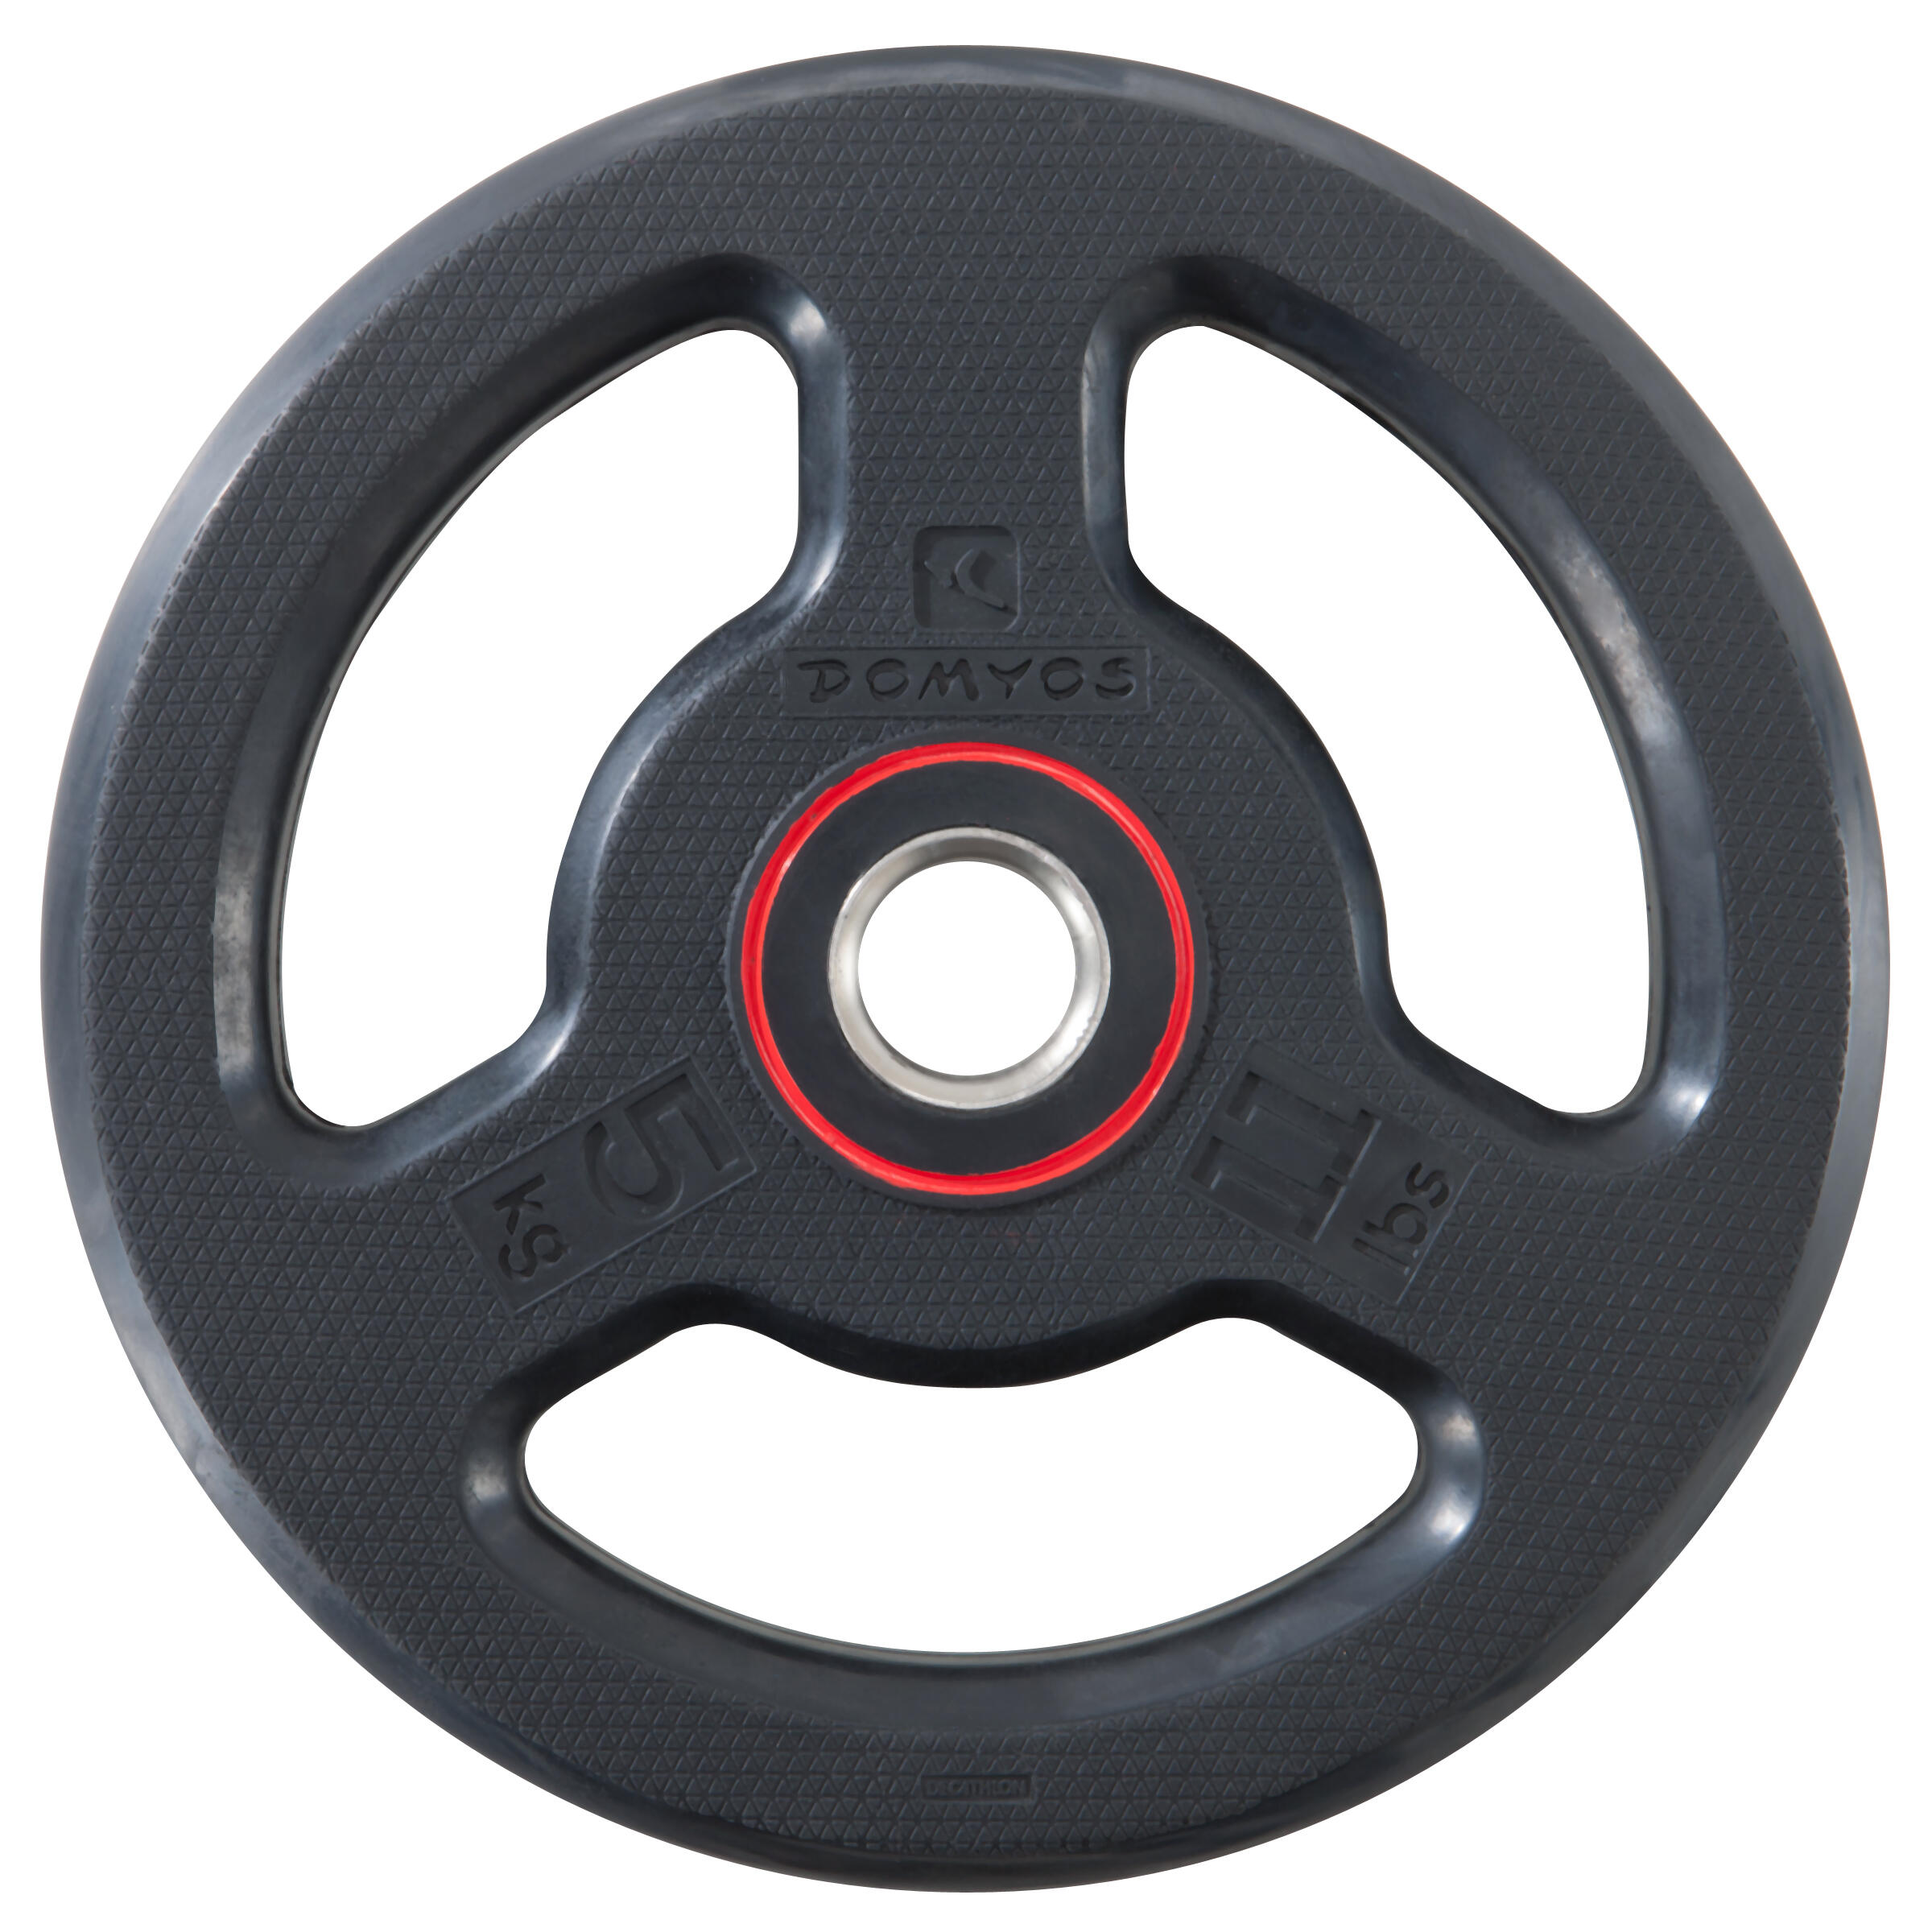 28 mm 5 kg Rubber Weight Plate with Handles - CORENGTH